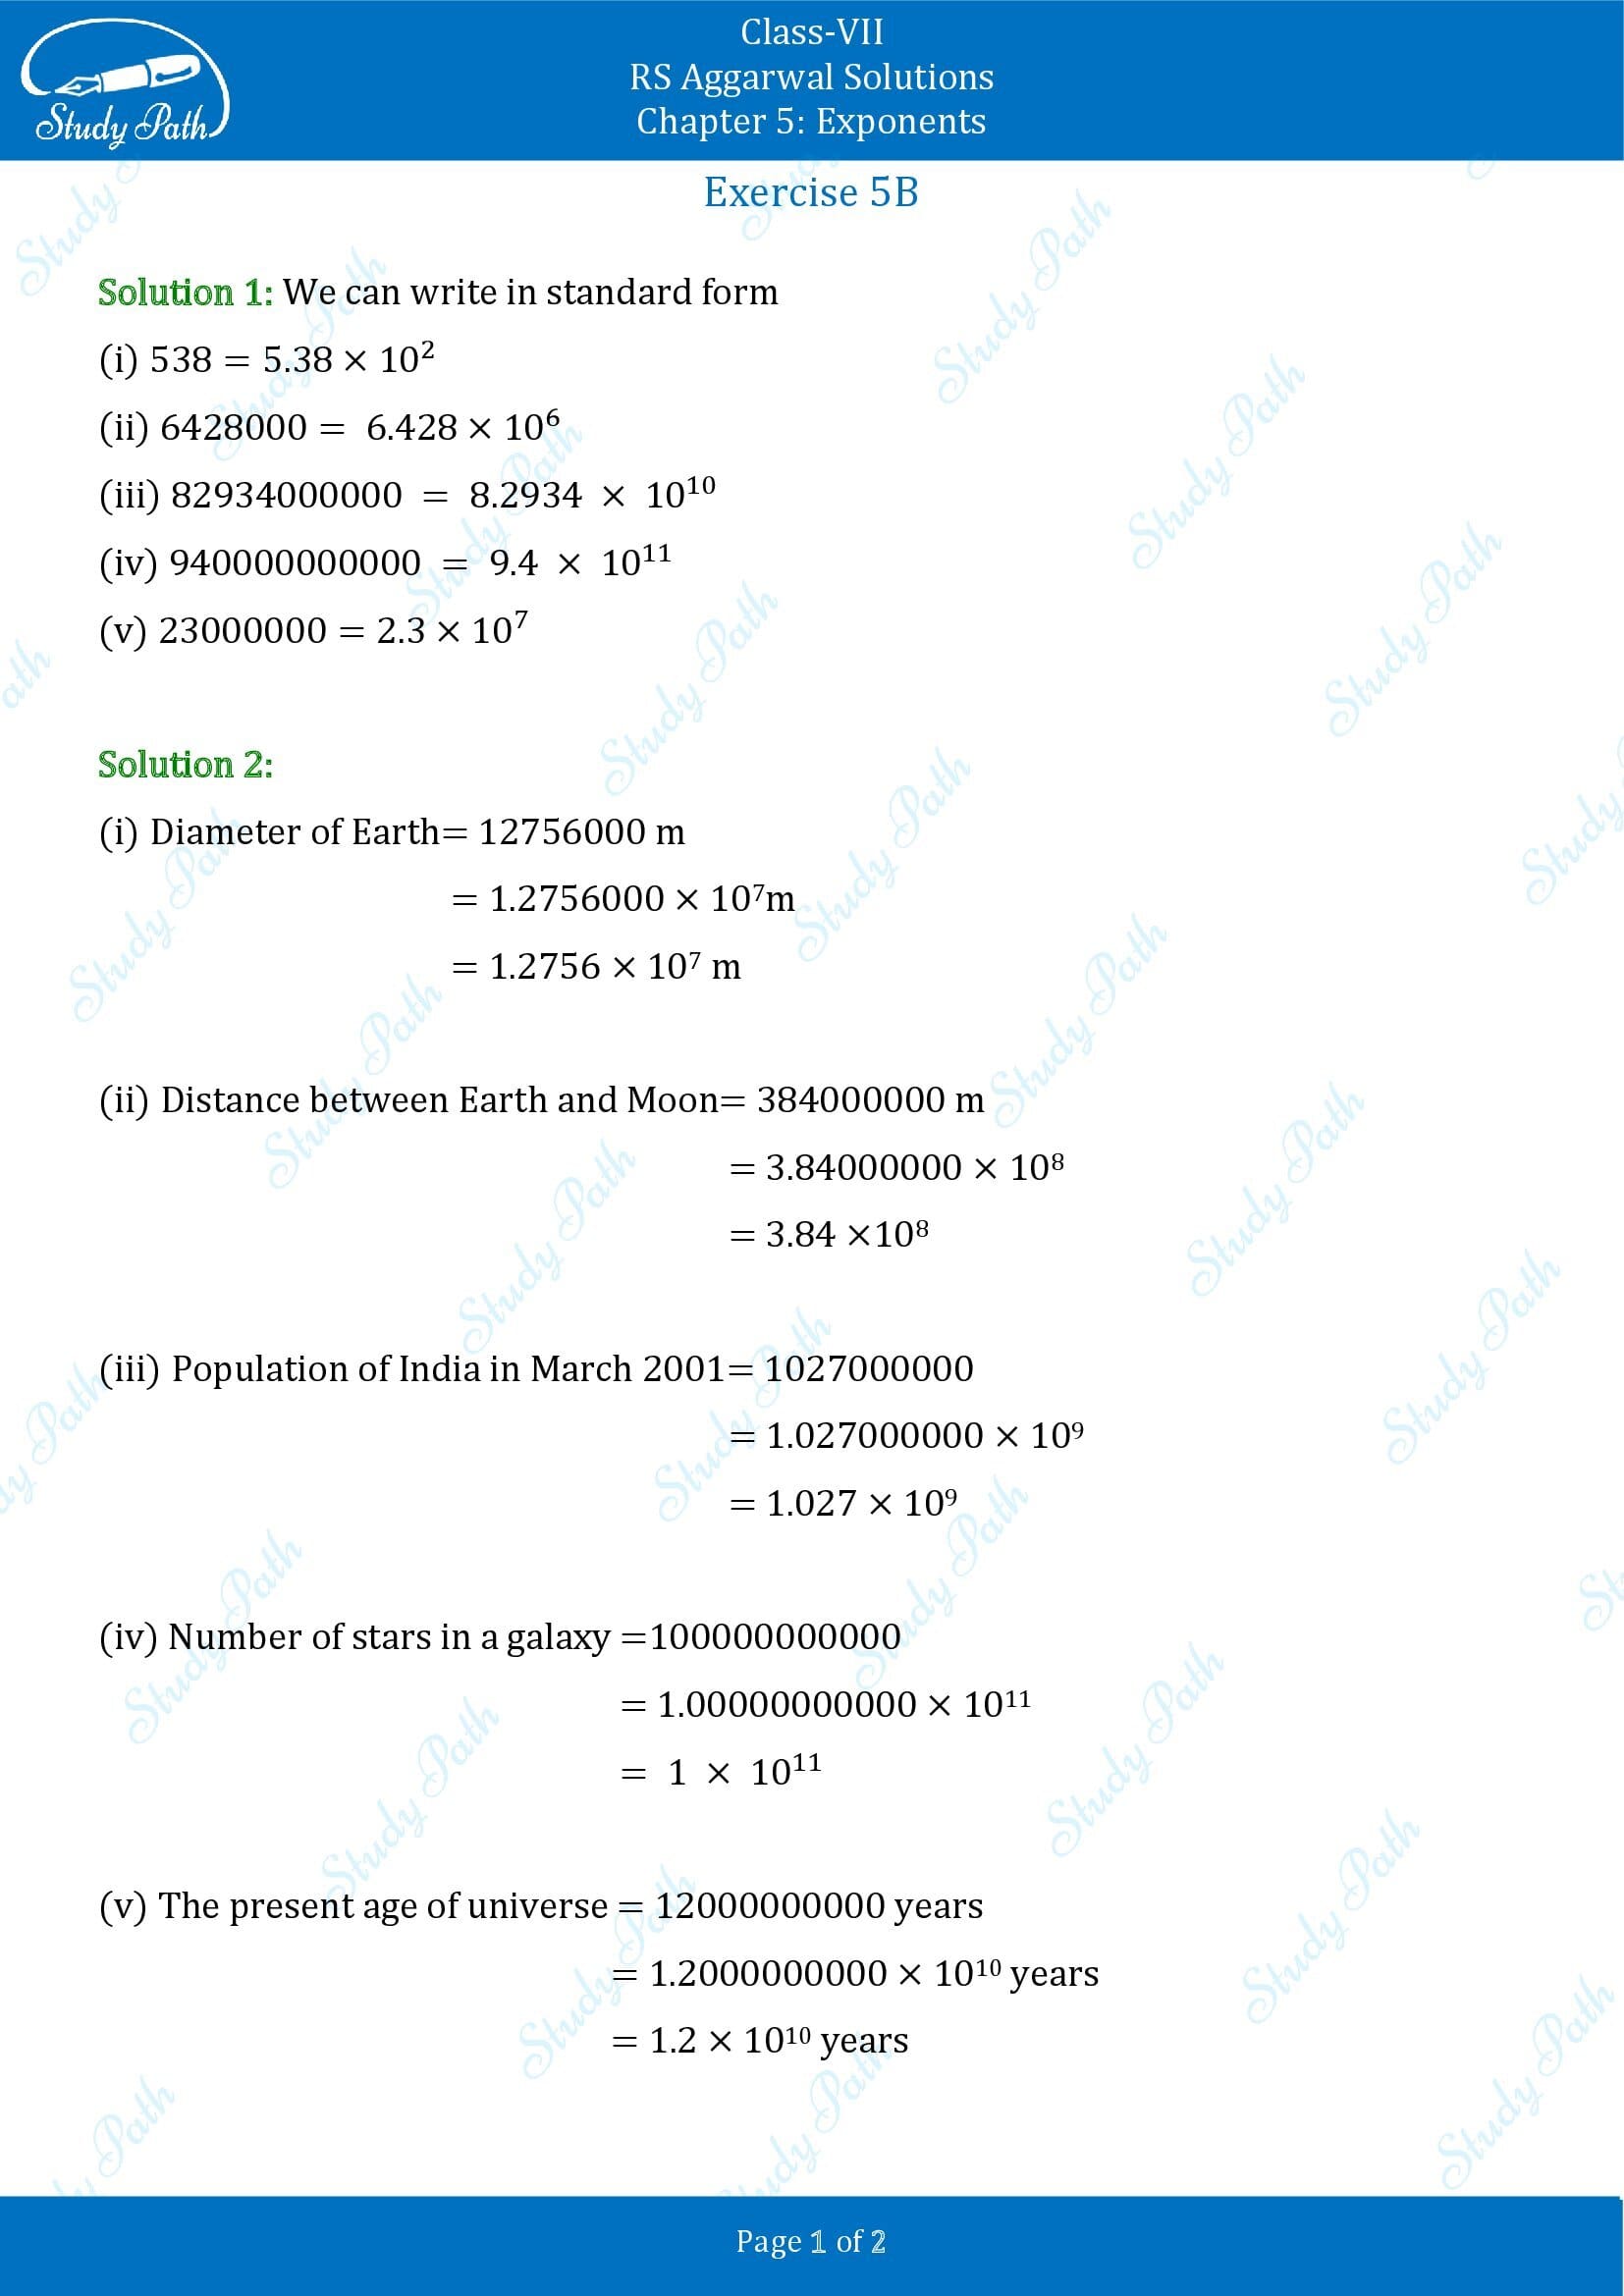 RS Aggarwal Solutions Class 7 Chapter 5 Exponents Exercise 5B 001